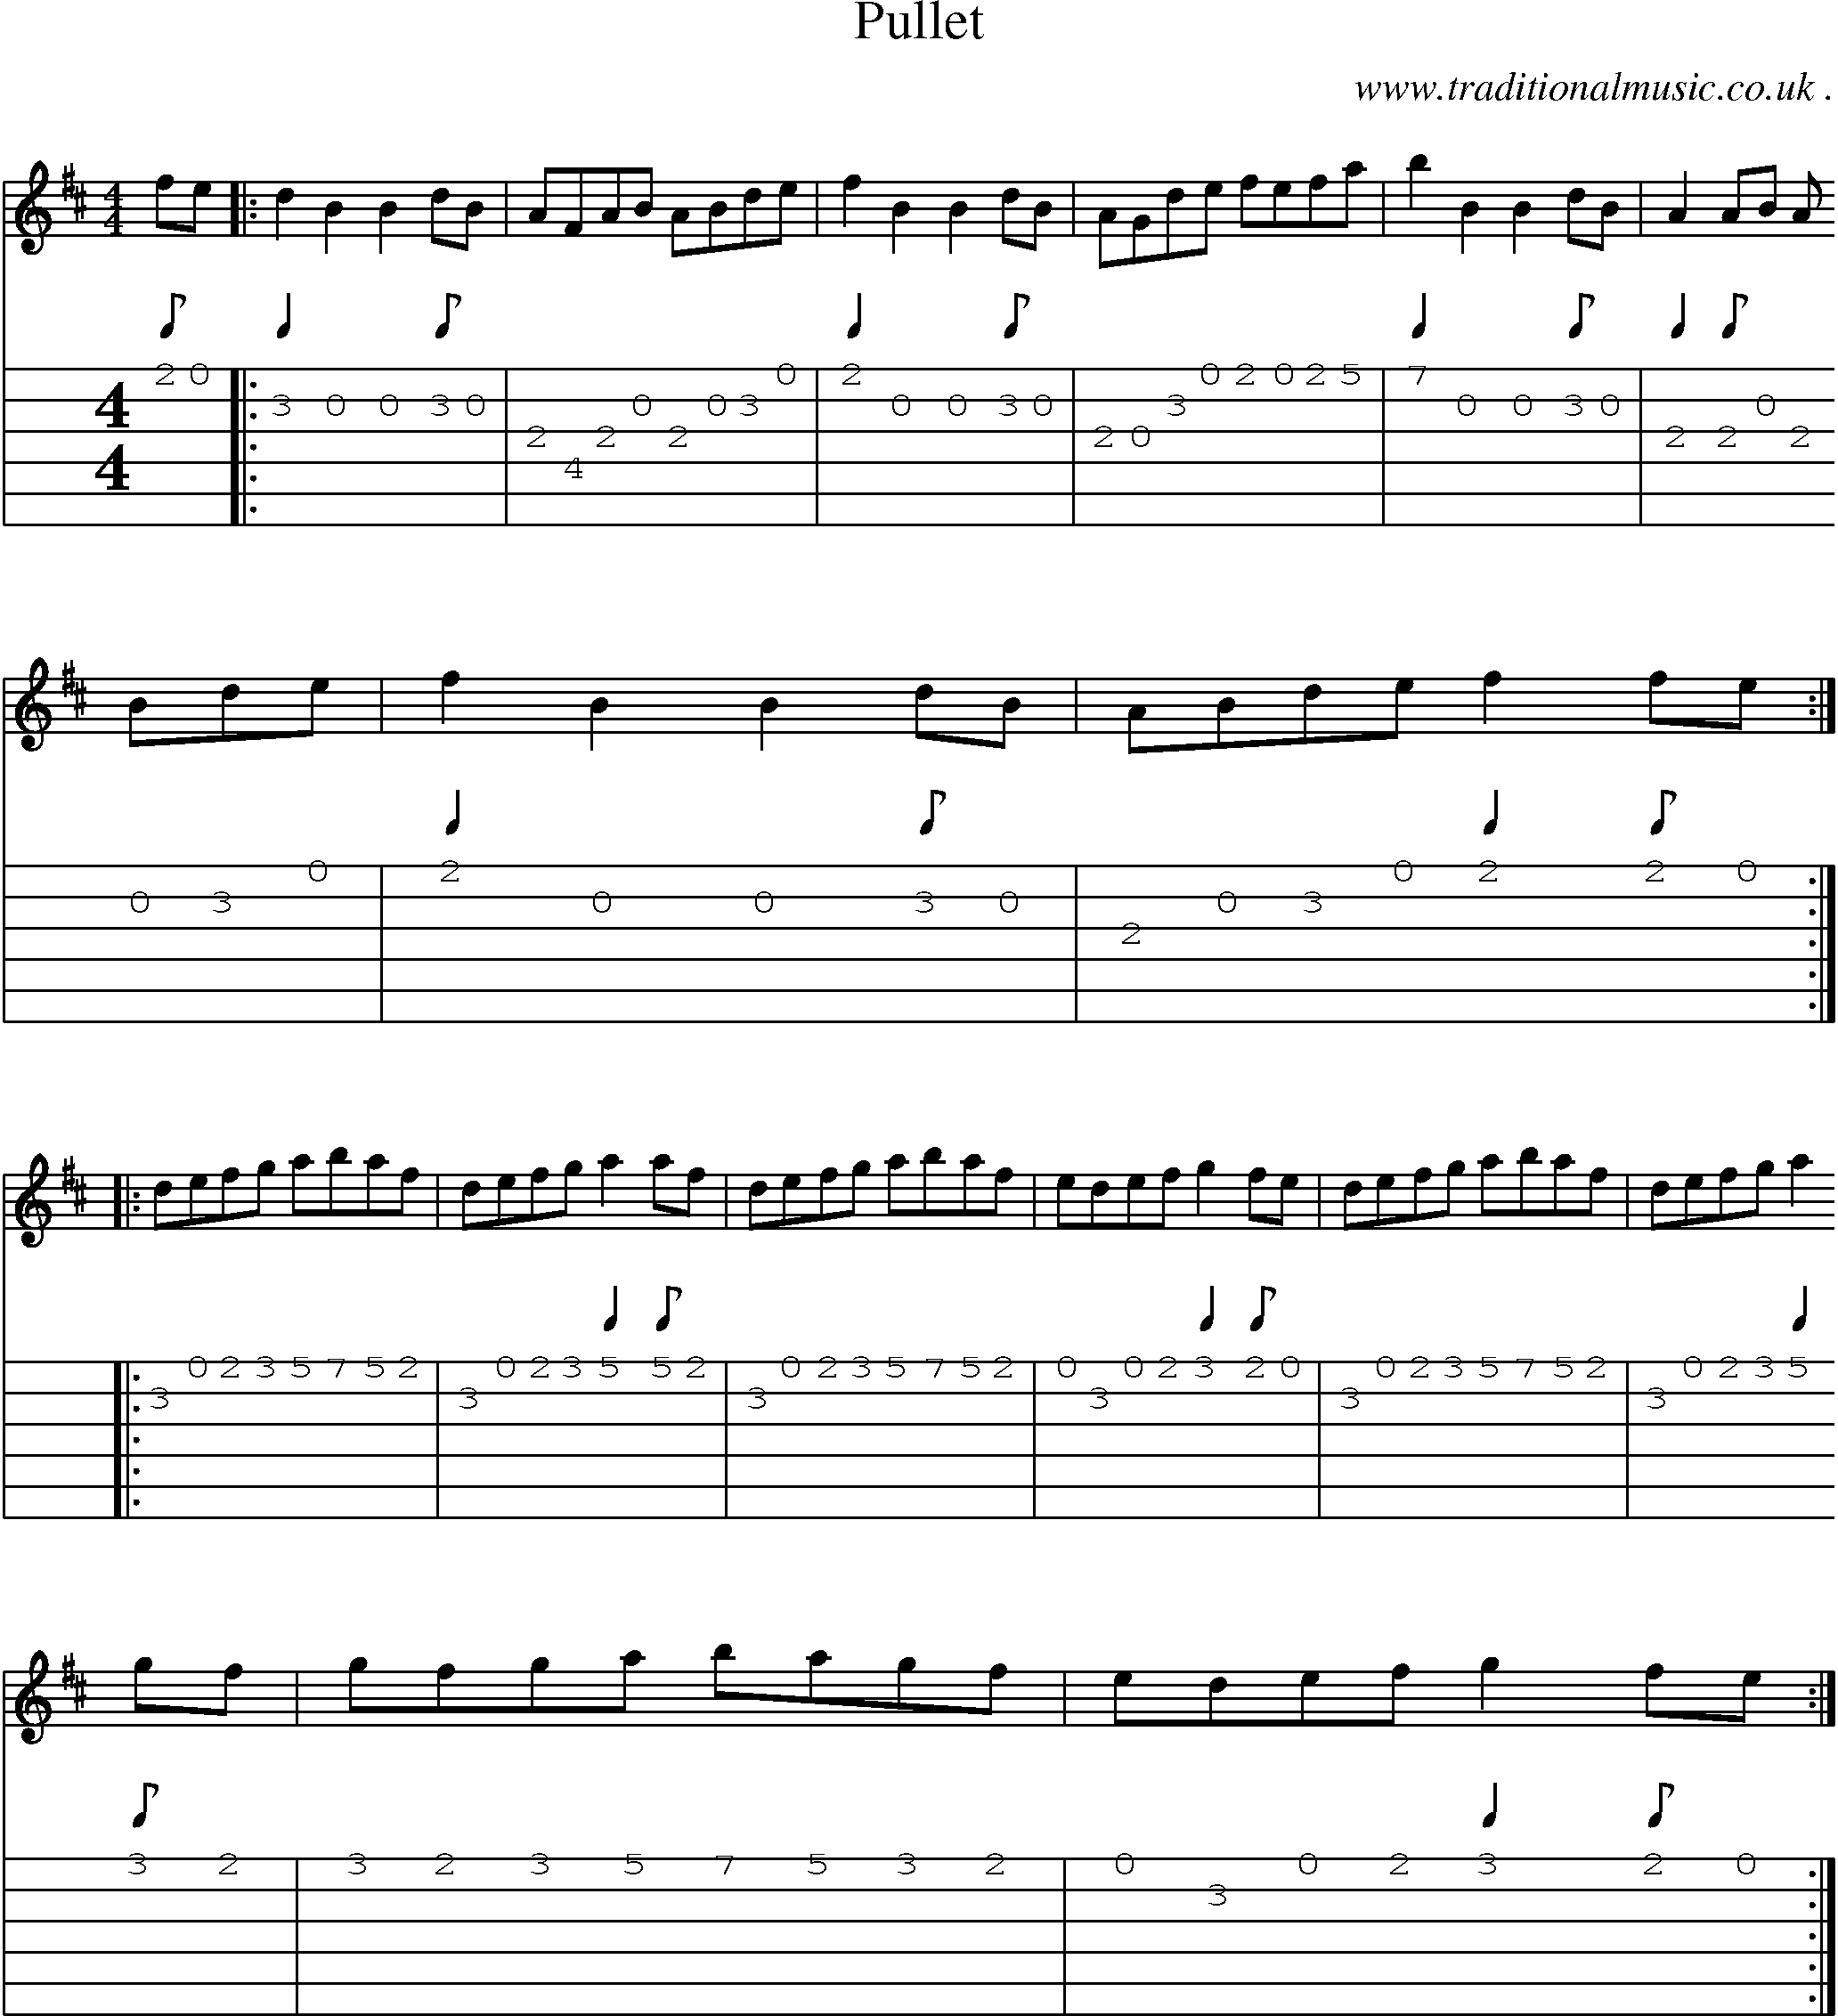 Sheet-Music and Guitar Tabs for Pullet